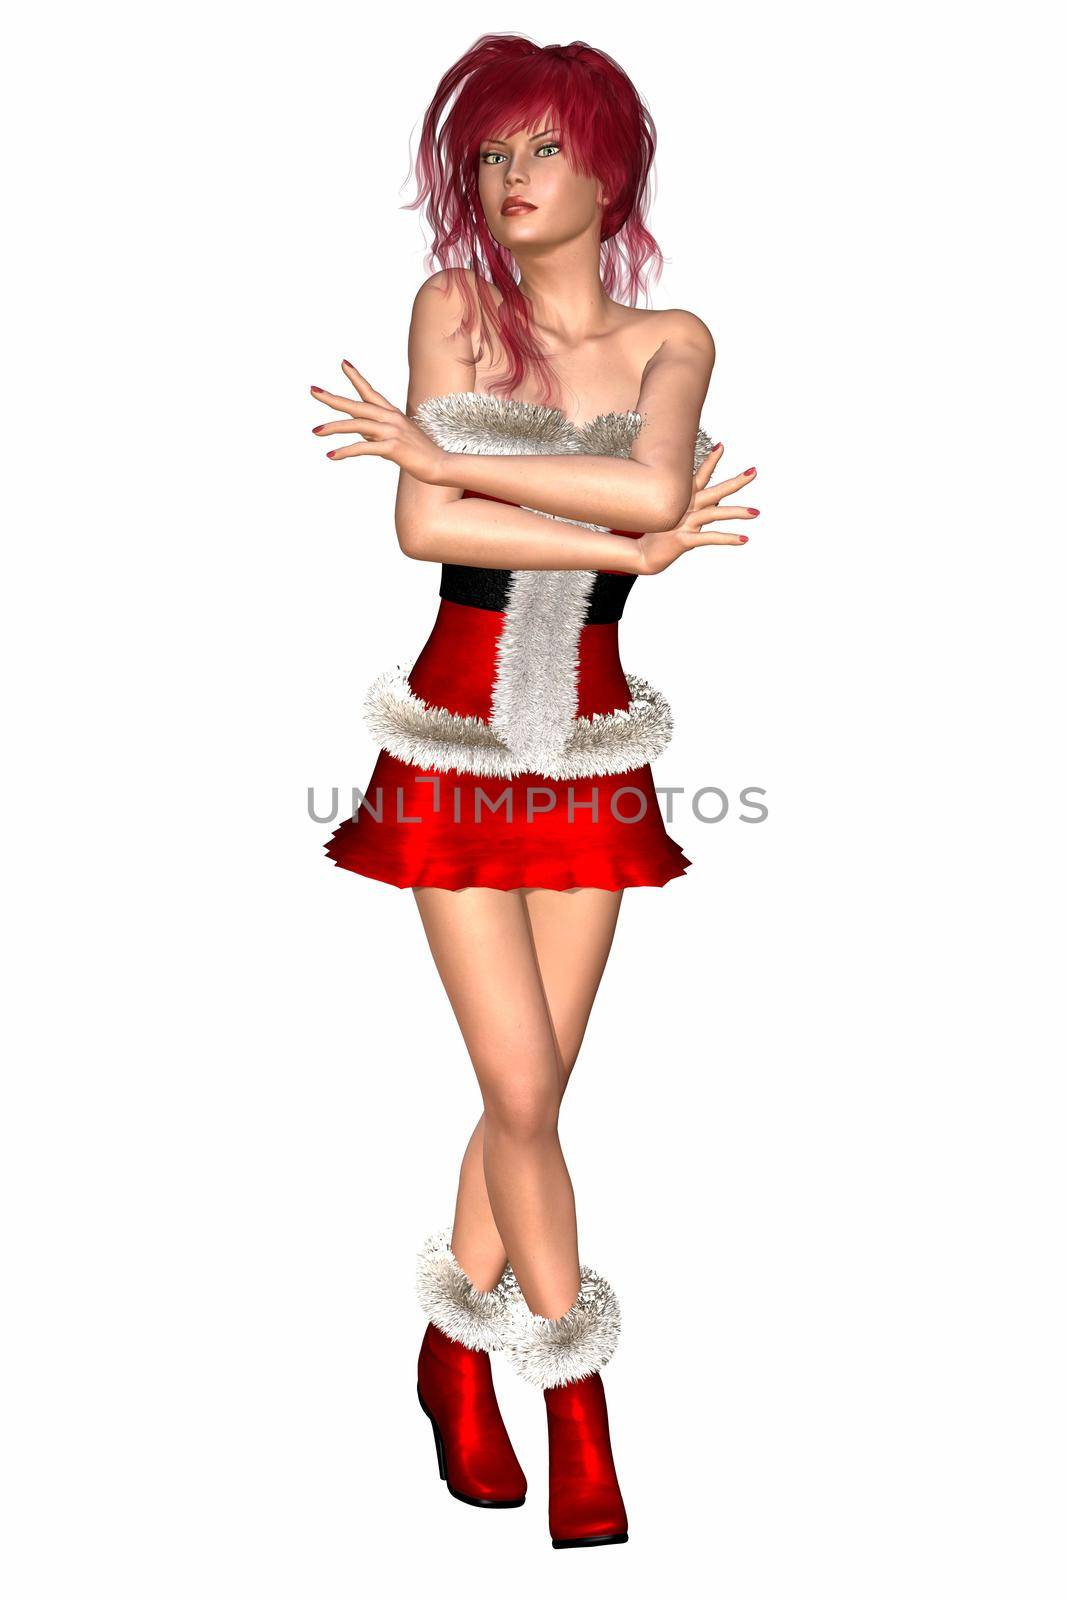 Digital Illustration of a Woman in Christmas Dress by 3quarks